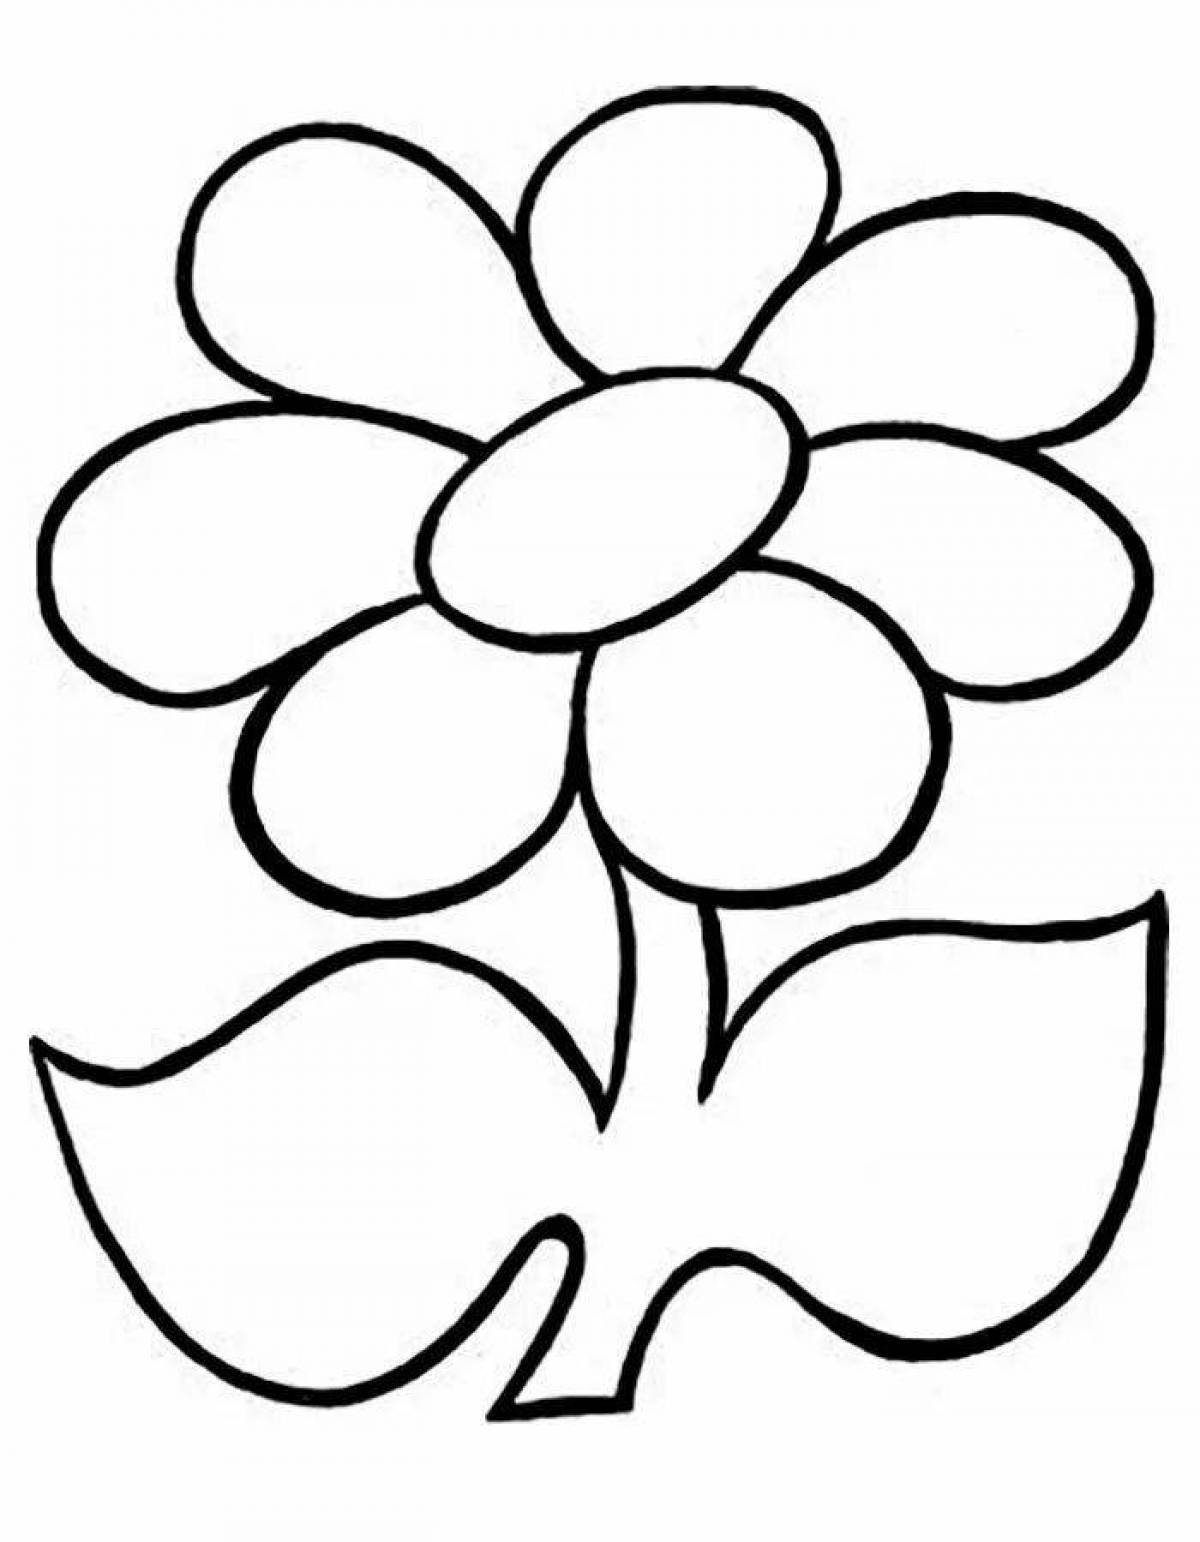 Coloring book with beautiful flower pattern